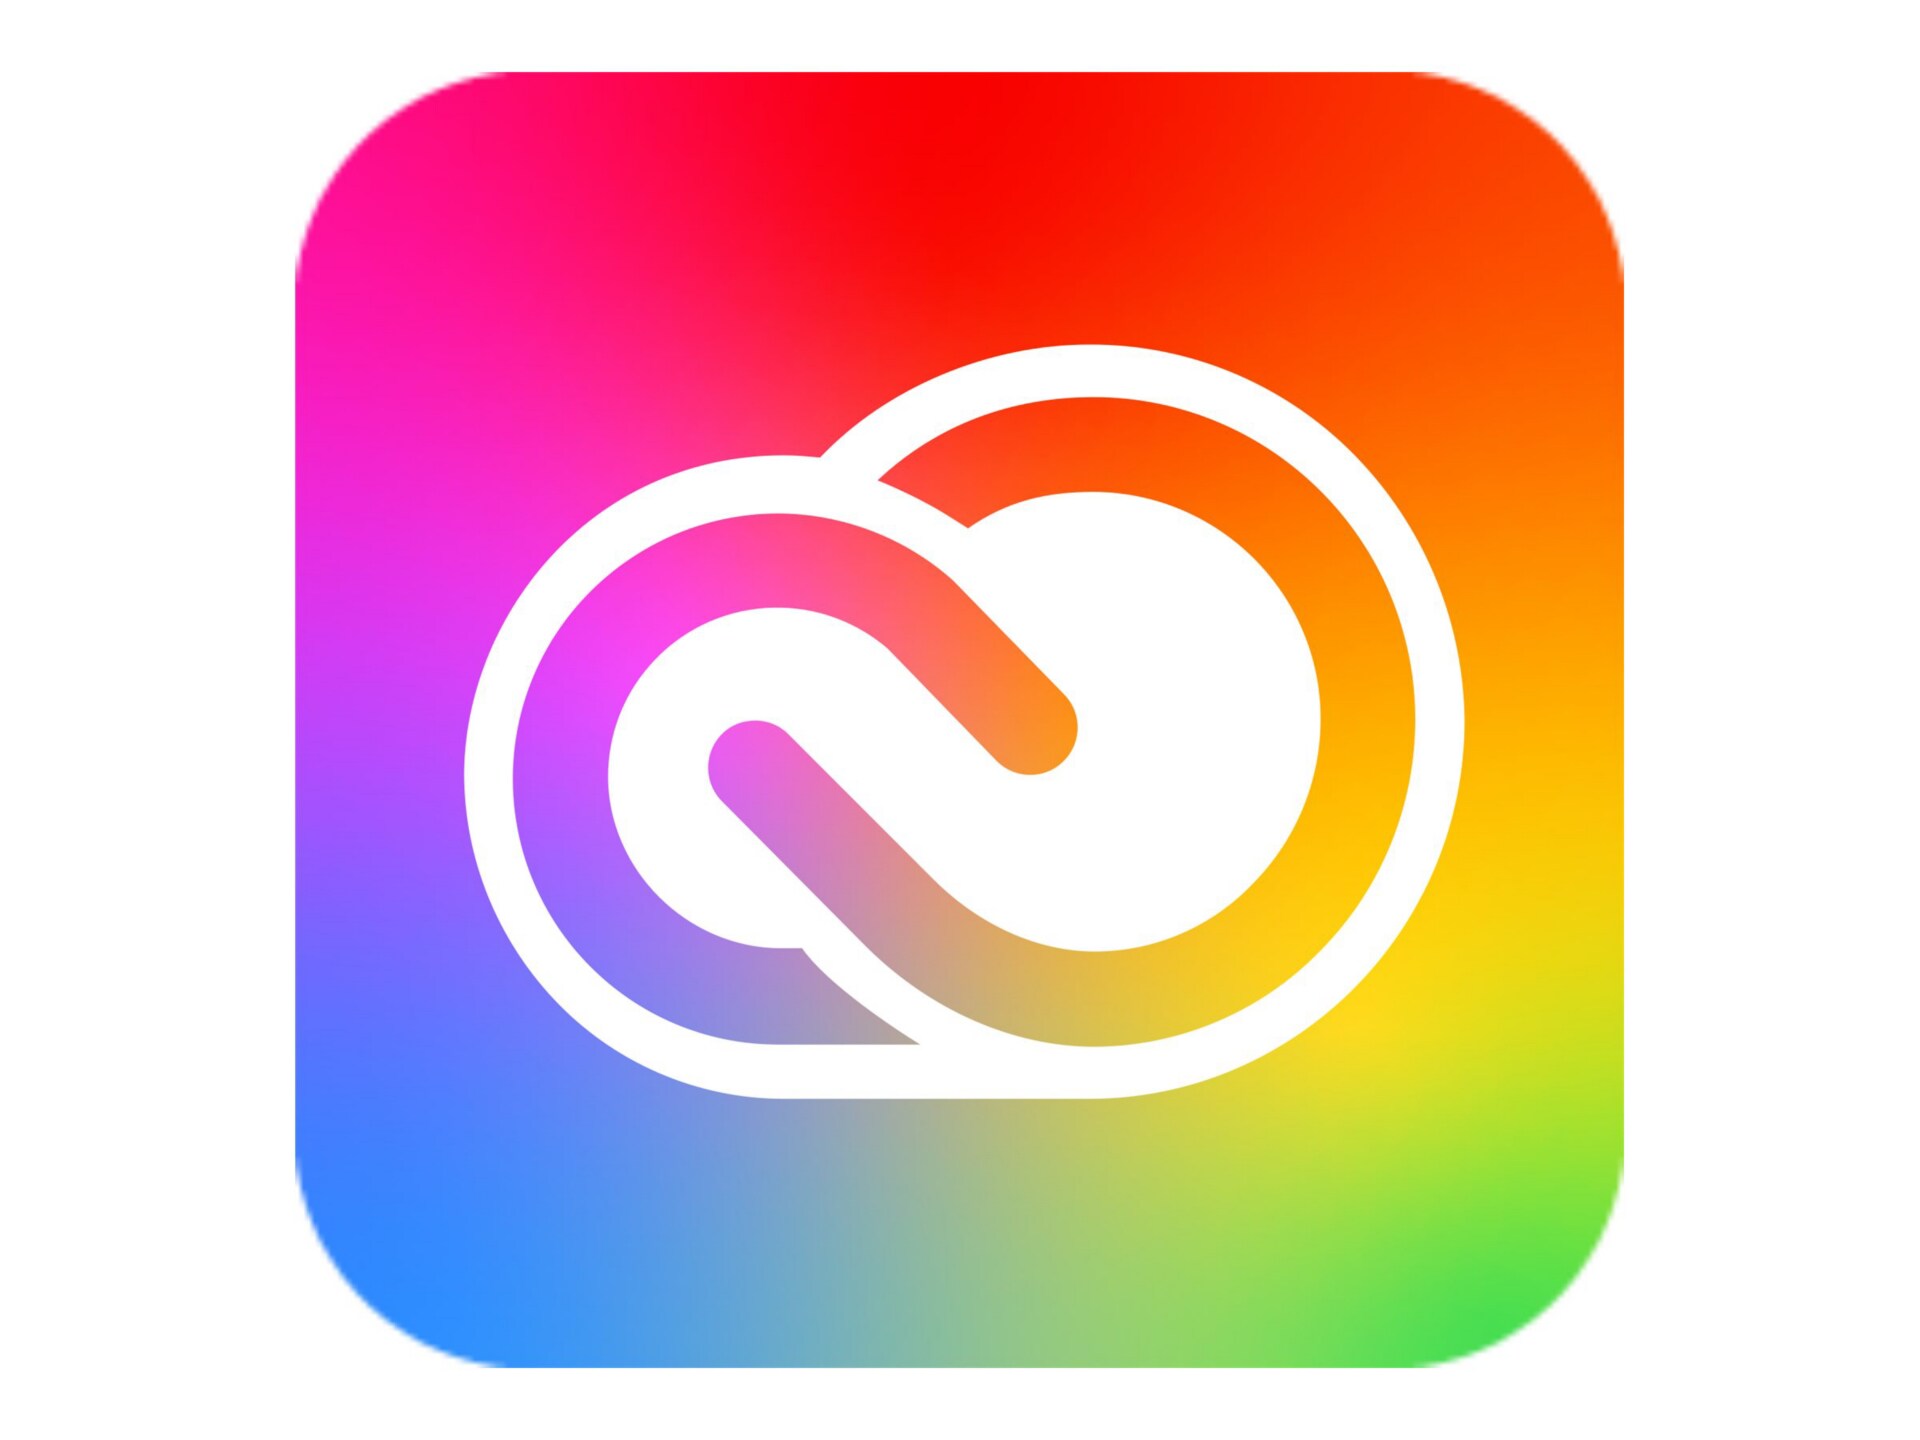 Adobe Creative Cloud for teams - All Apps - Subscription Renewal - 1 user - with Adobe Stock